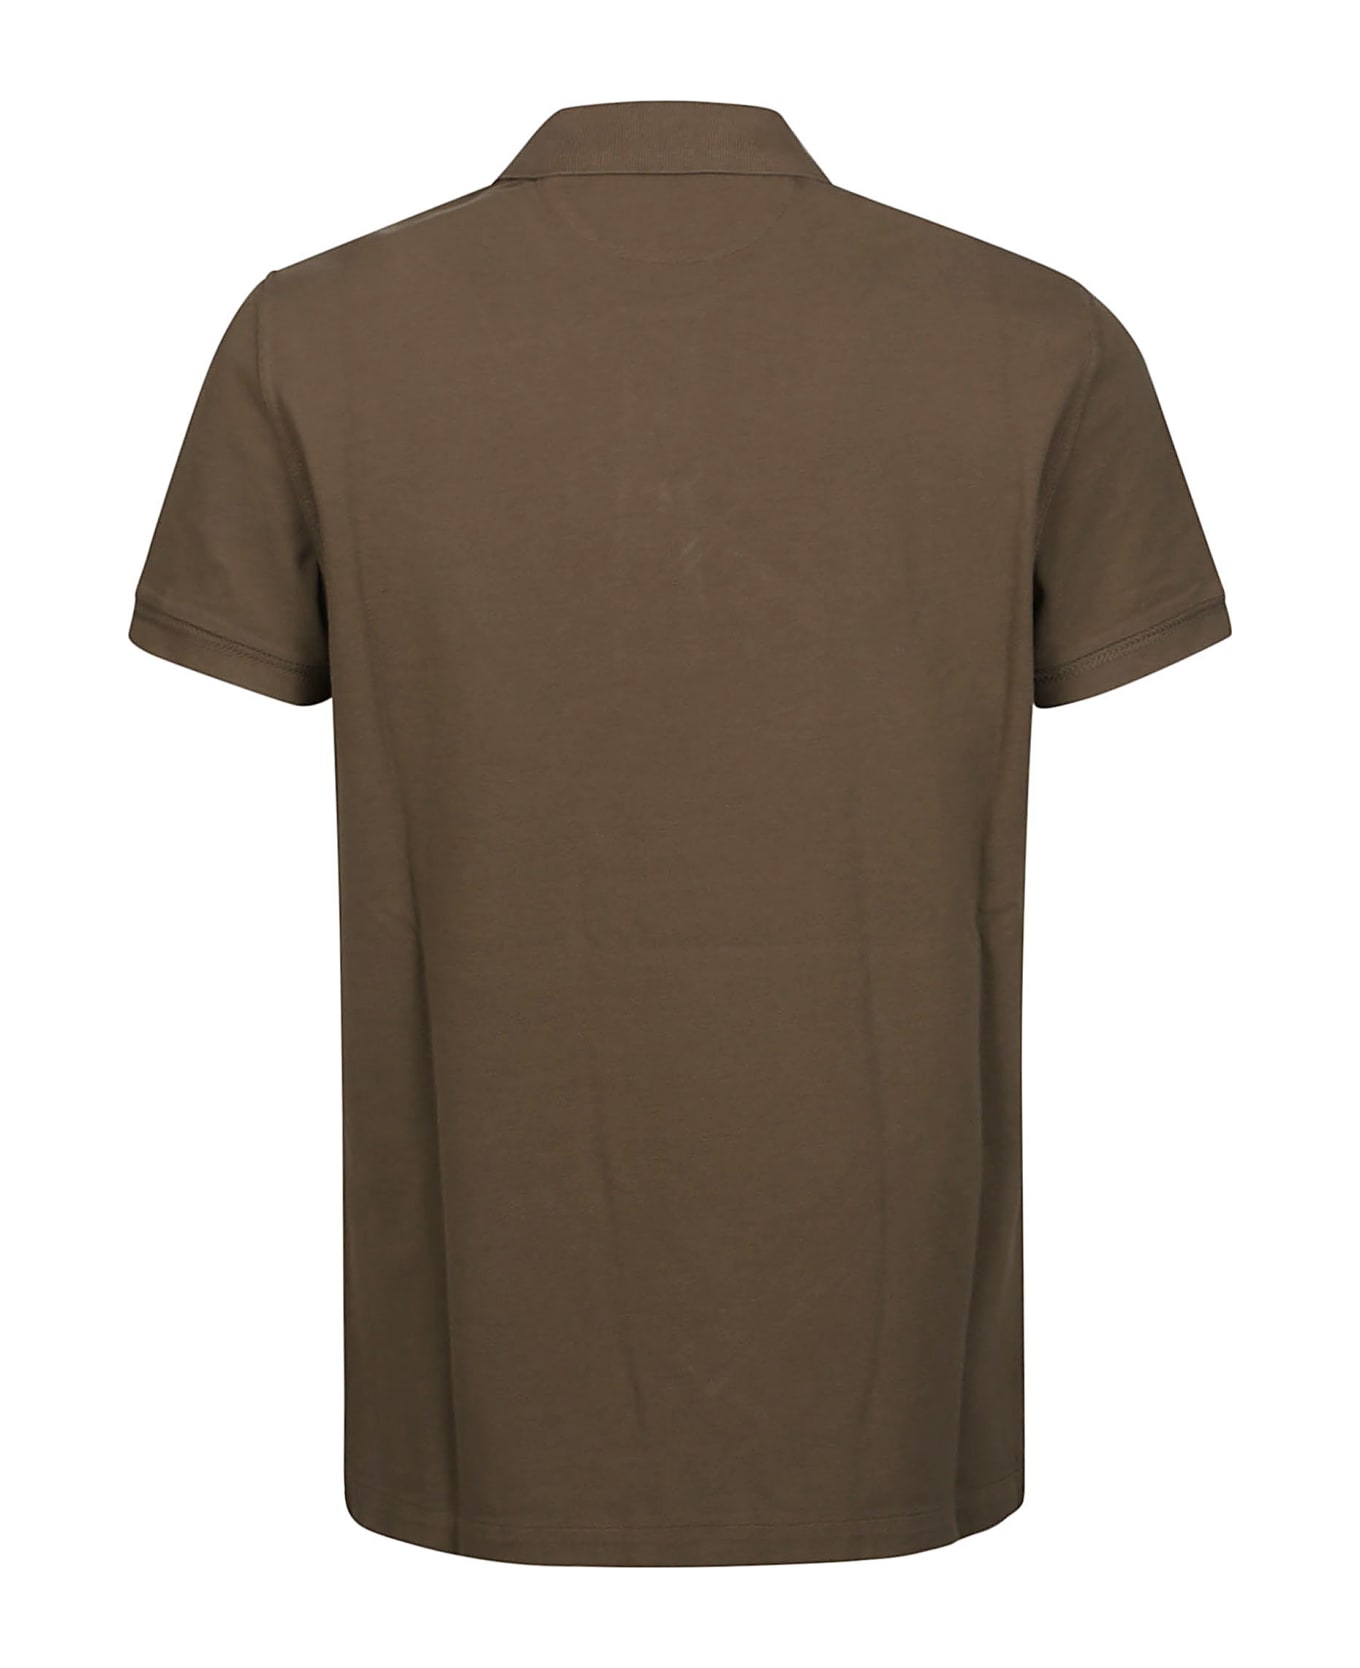 Tom Ford Tennis Piquet Short Sleeve Polo Shirt - Olive ポロシャツ